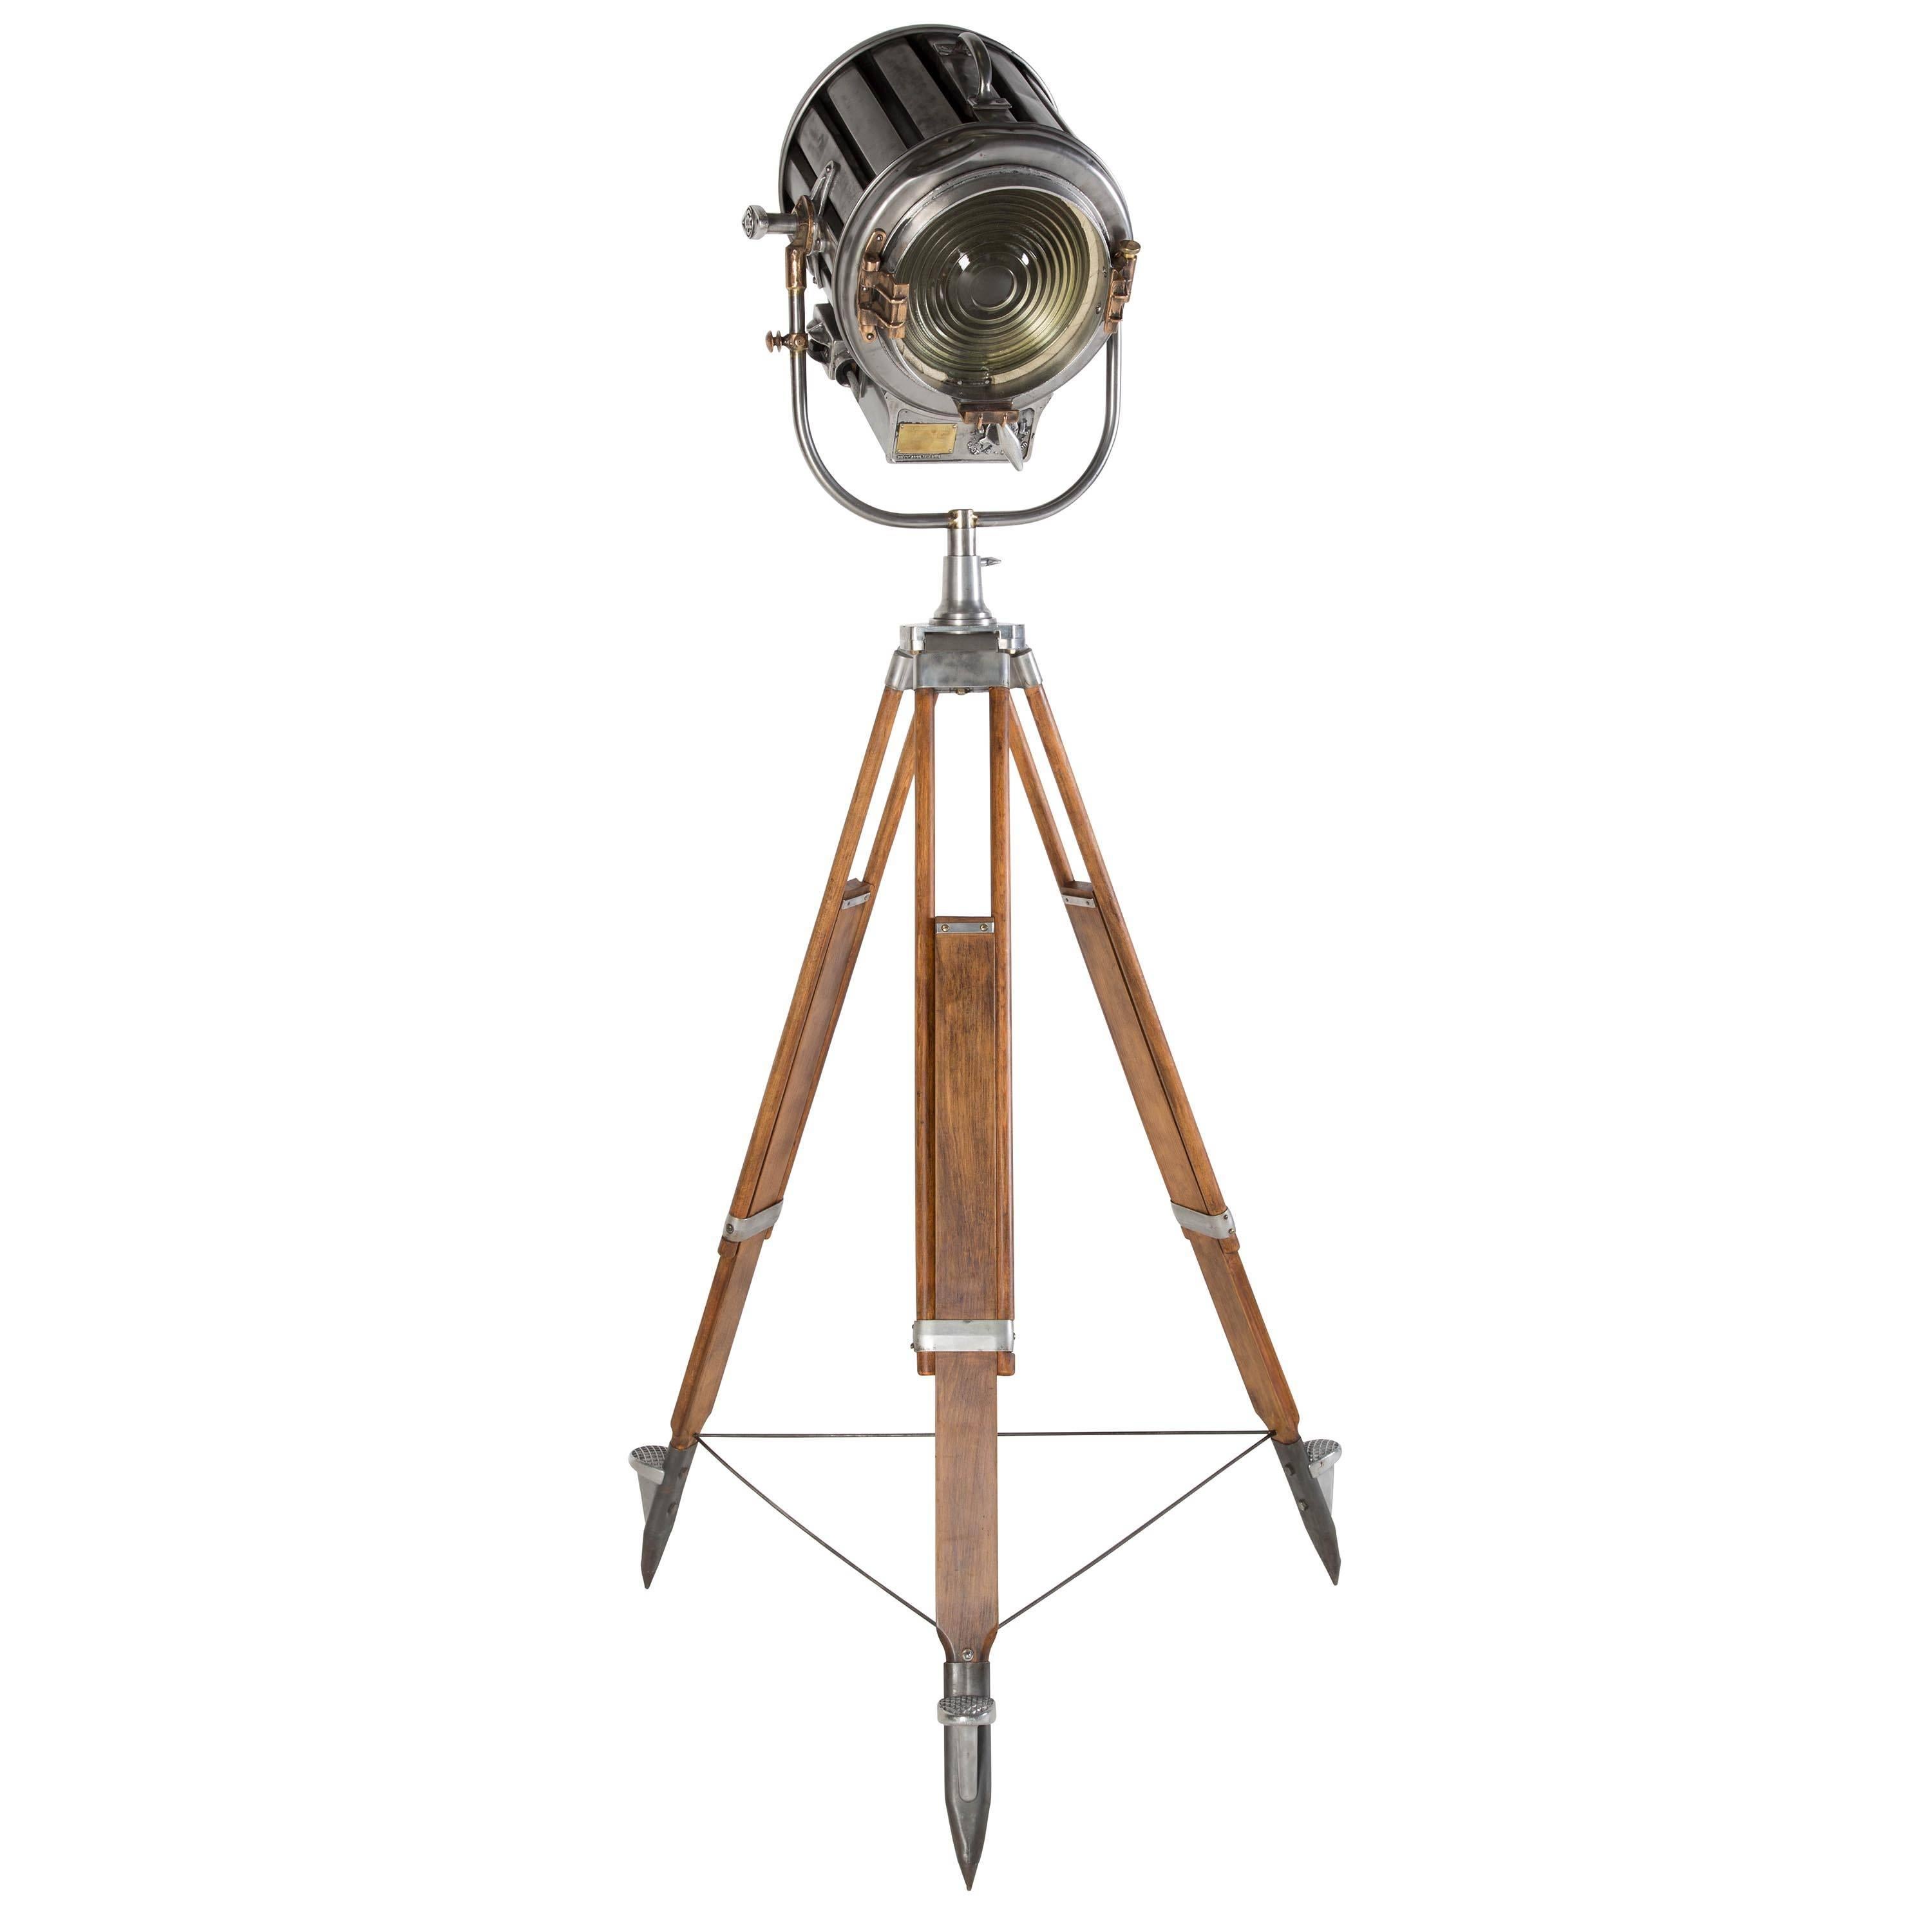 A large antique theatre light on stand by Mole Richardson, circa 1930. All restored to a very high standard, having been completely rewired and PAT tested. The lamp still retains its original flood to spot adjustment. It was purchased with a group